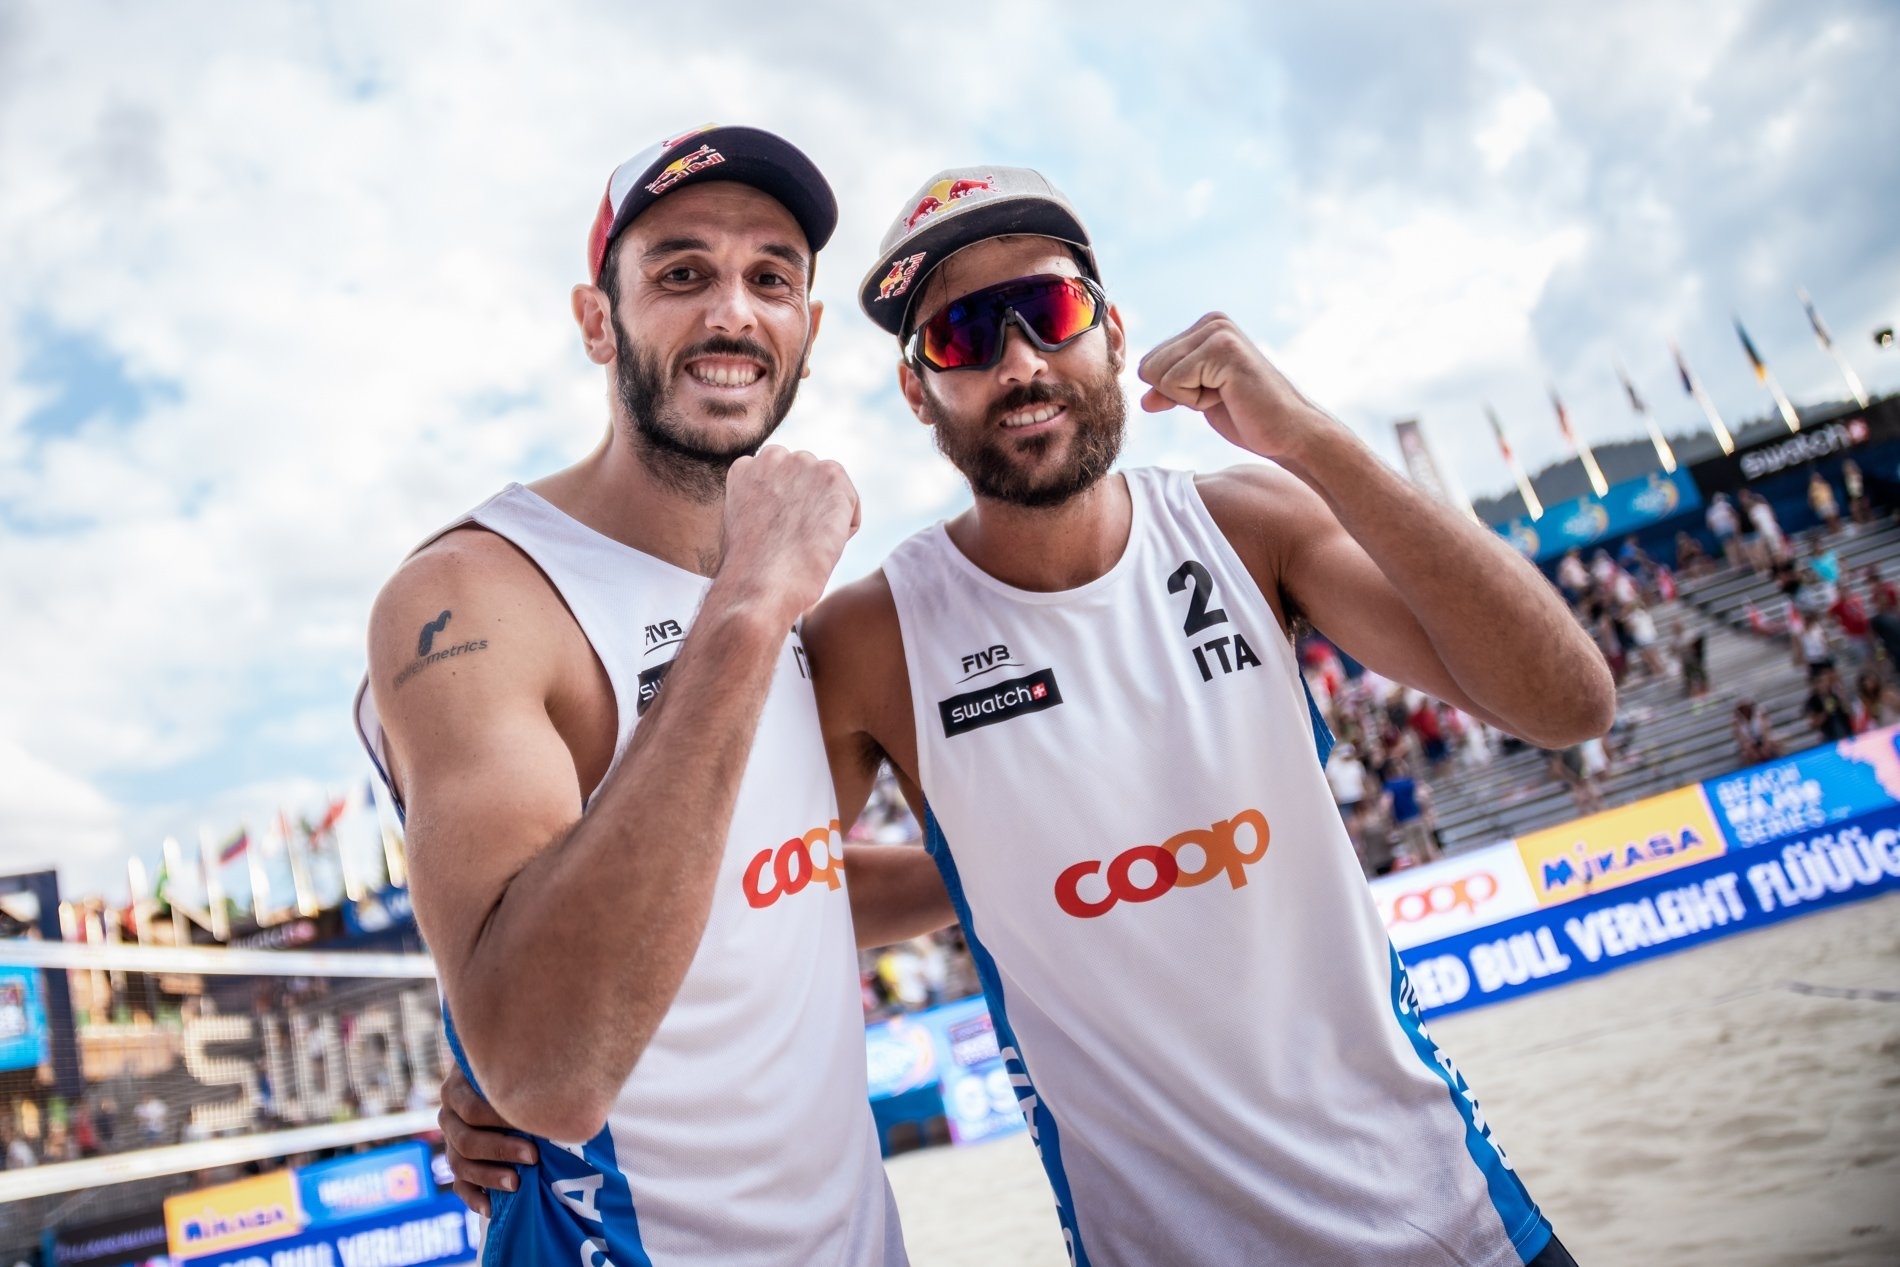 Lupo/Nicolai, who won bronze in Gstaad, lost to Samoilovs/Smedins last week